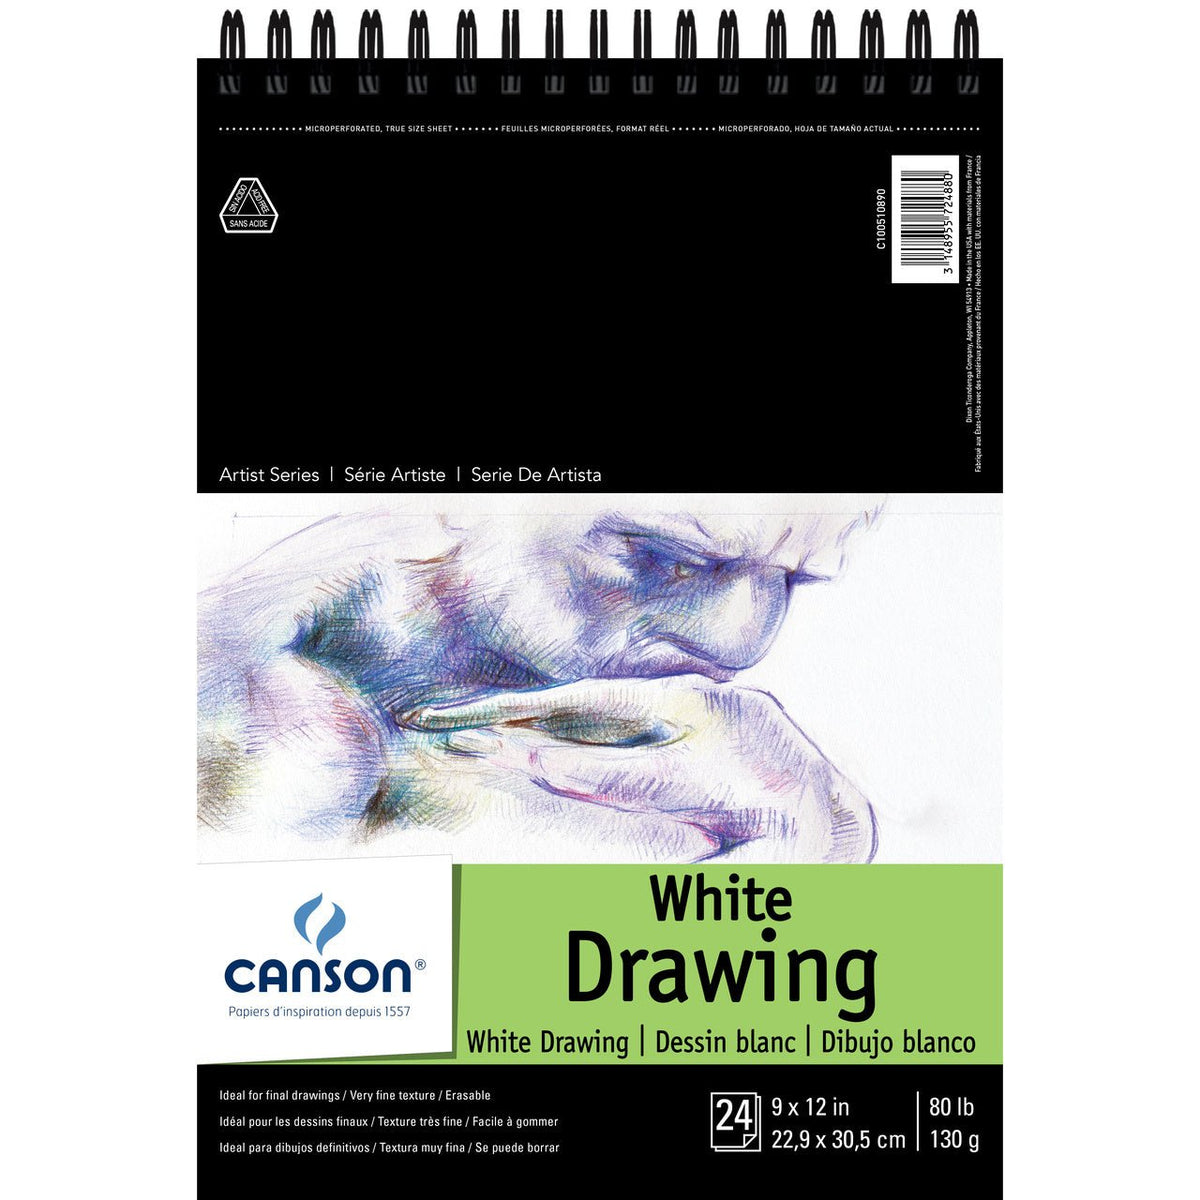 Canson Pure White 80 lb Drawing Pad 9x12 inch - merriartist.com